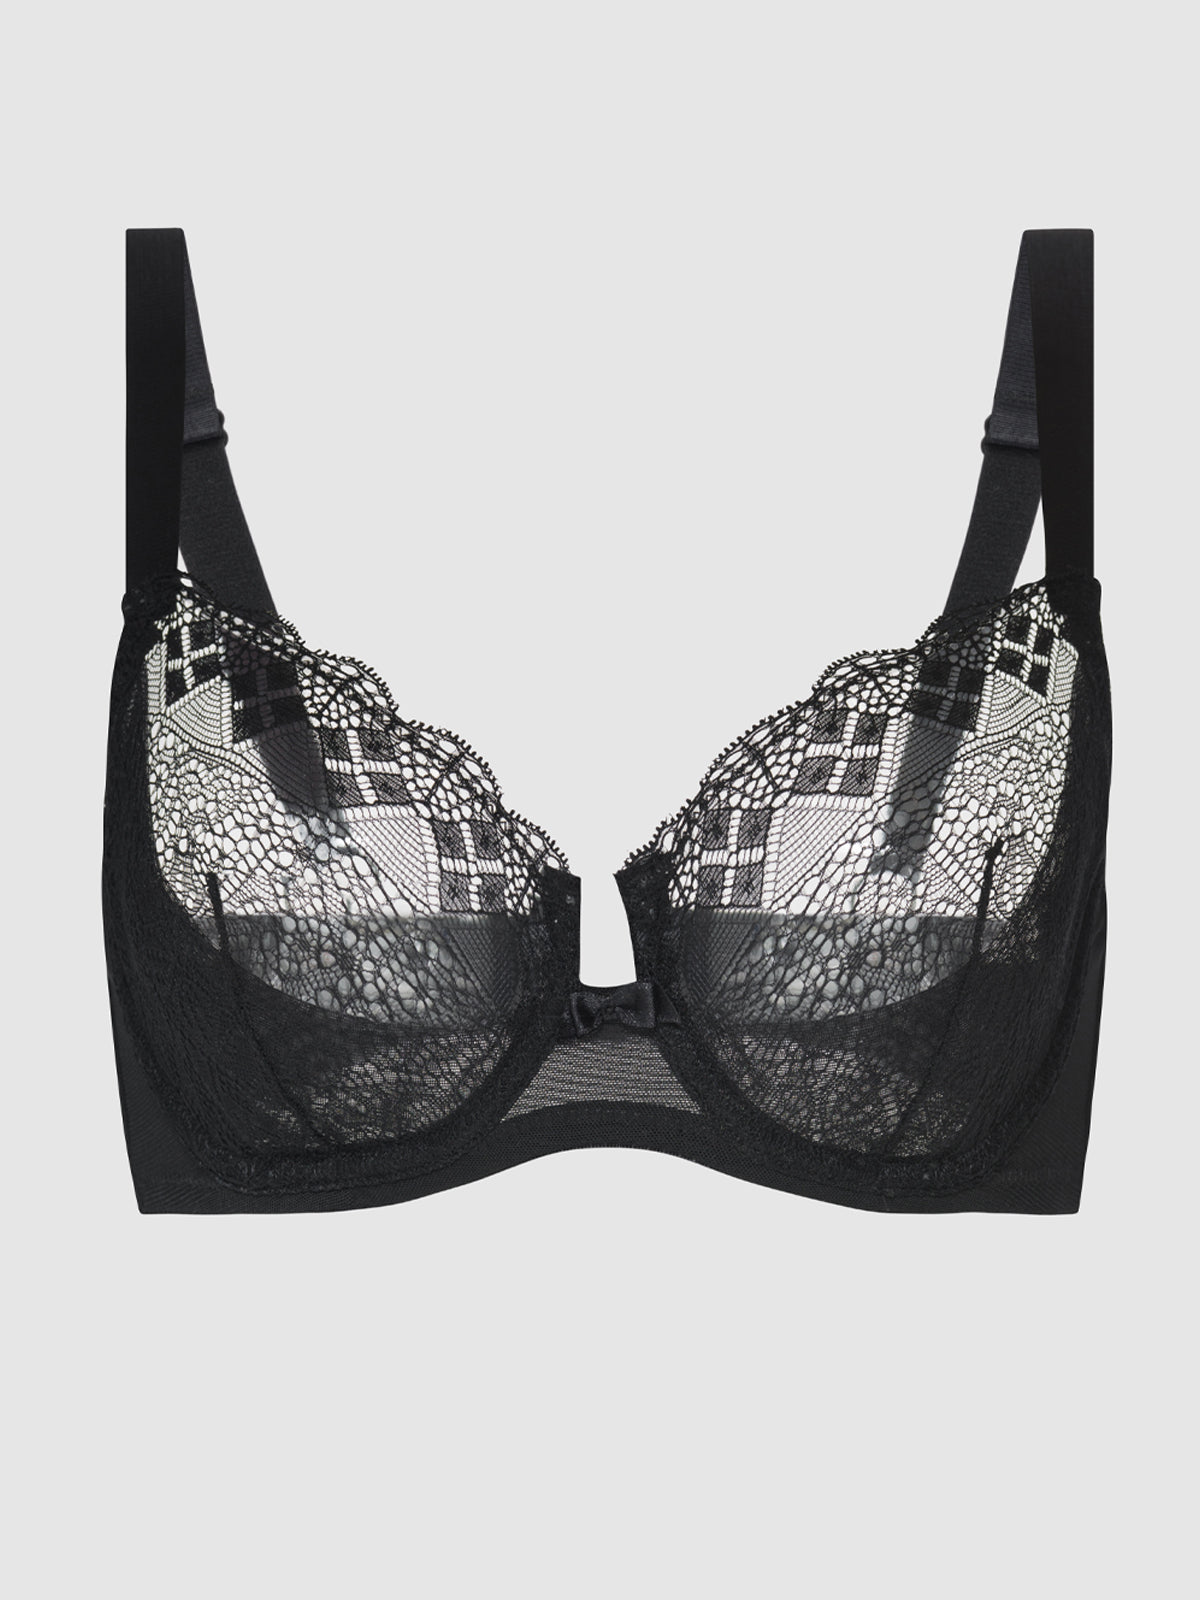 ▷ Marlon Bra Full Cup Lace Underwired Black White or Mixed (1 or 2 PACK) -  CENTRO COMERCIAL CASTELLANA 200 ◁